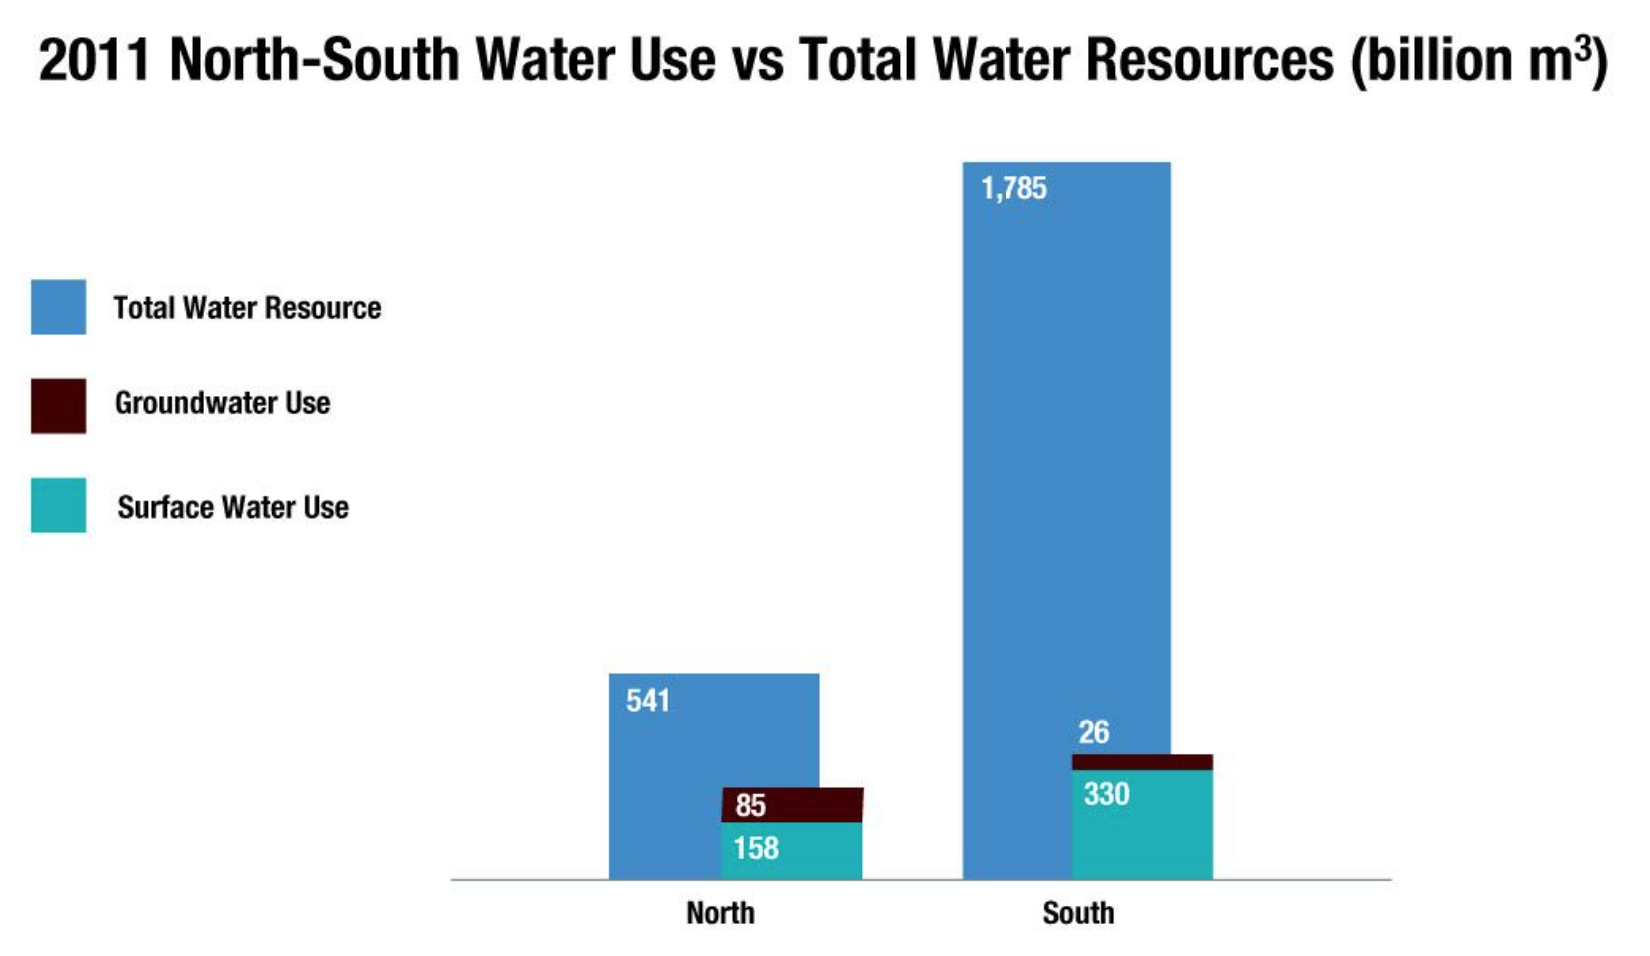 North-south water use versus total water resource in 2011